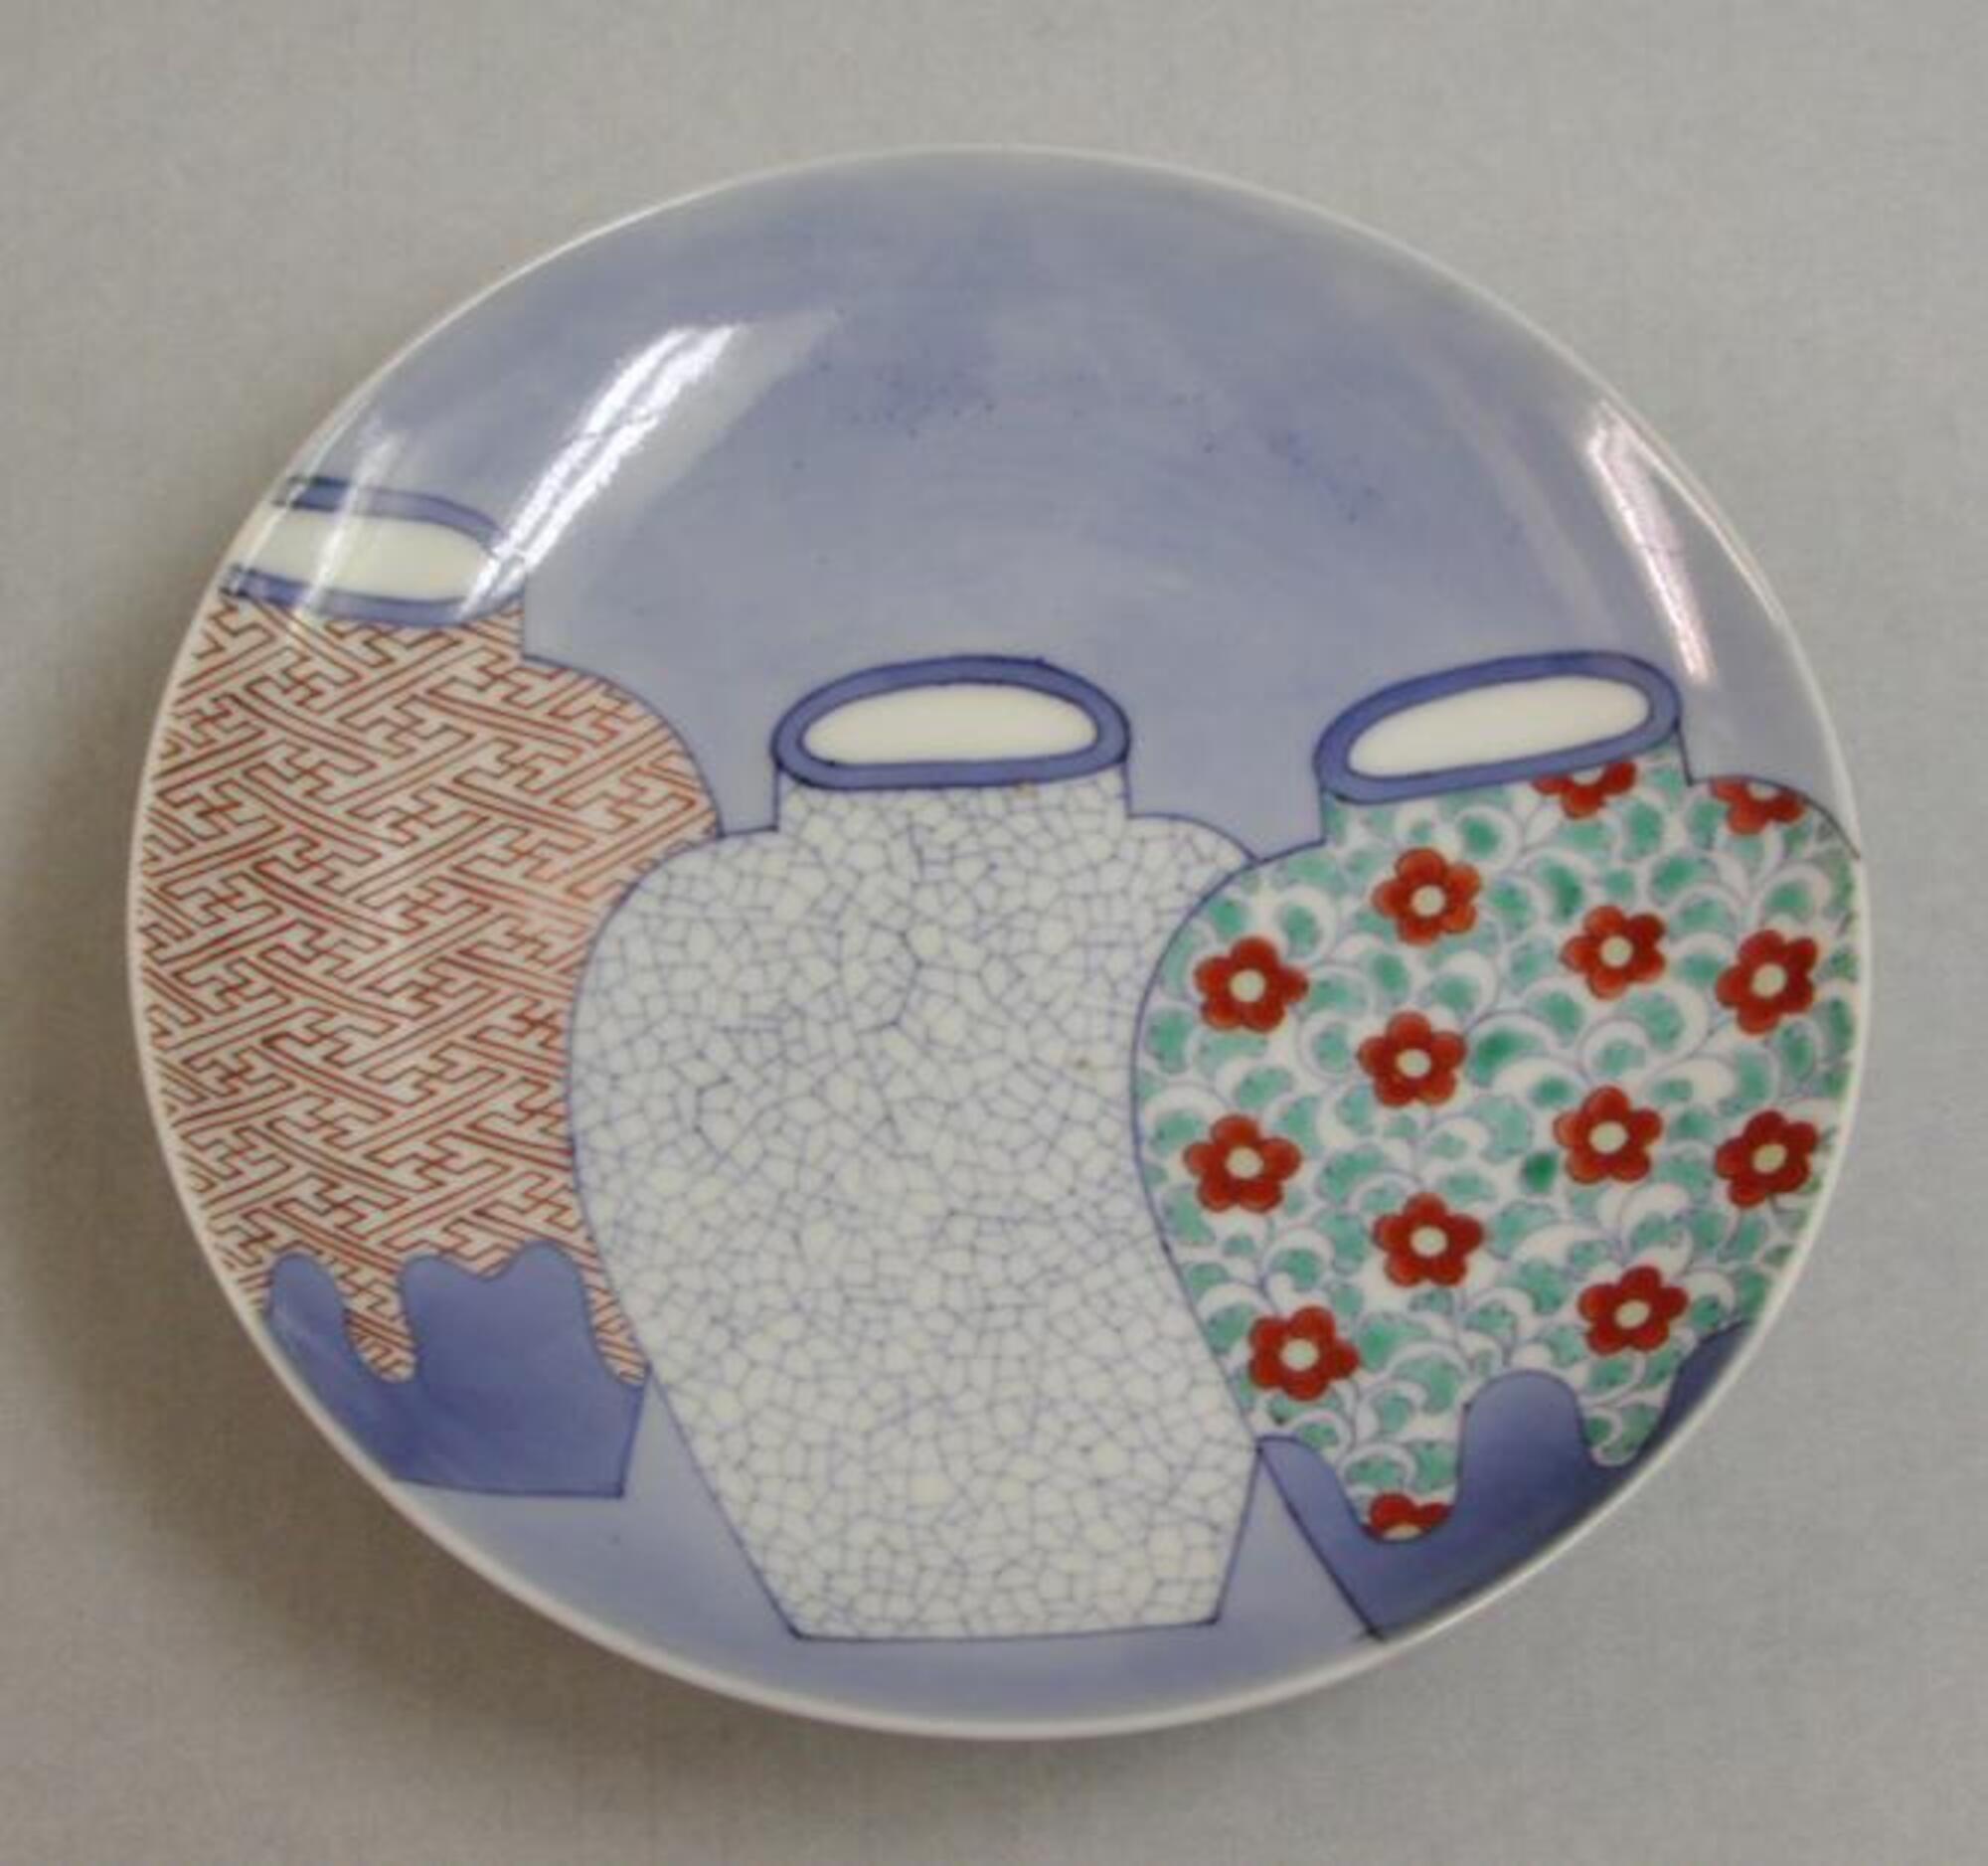 A circular, smaller white porcelain plate. On the upper surface, three vases, similar in shape, are shown overlapping diagonally in blue background. The two outer vases run off the plate’s rim. They are outlined in underglaze blue and are against a painted light-blue background. The left vase is covered with a white glaze (which left unpainted) under a red key-fret design. The center vase is totally covered with a white crackle pattern done in blue underglaze line. The right vase has a design of evenly-spaced red flowers. Precise flat bases are combined with a rather awkward suggestion of a three-dimensional view of the lips. The back has a triple representation of peony buds surrounded by fine branching stems and leaves. On the shallow foot, bold lines are drawn in a row like a comb. The design on the back is all drawn with blue underglaze. (Referencce: Becker, Sister Johanna. “A Group of Nabeshima Porcelain.”)